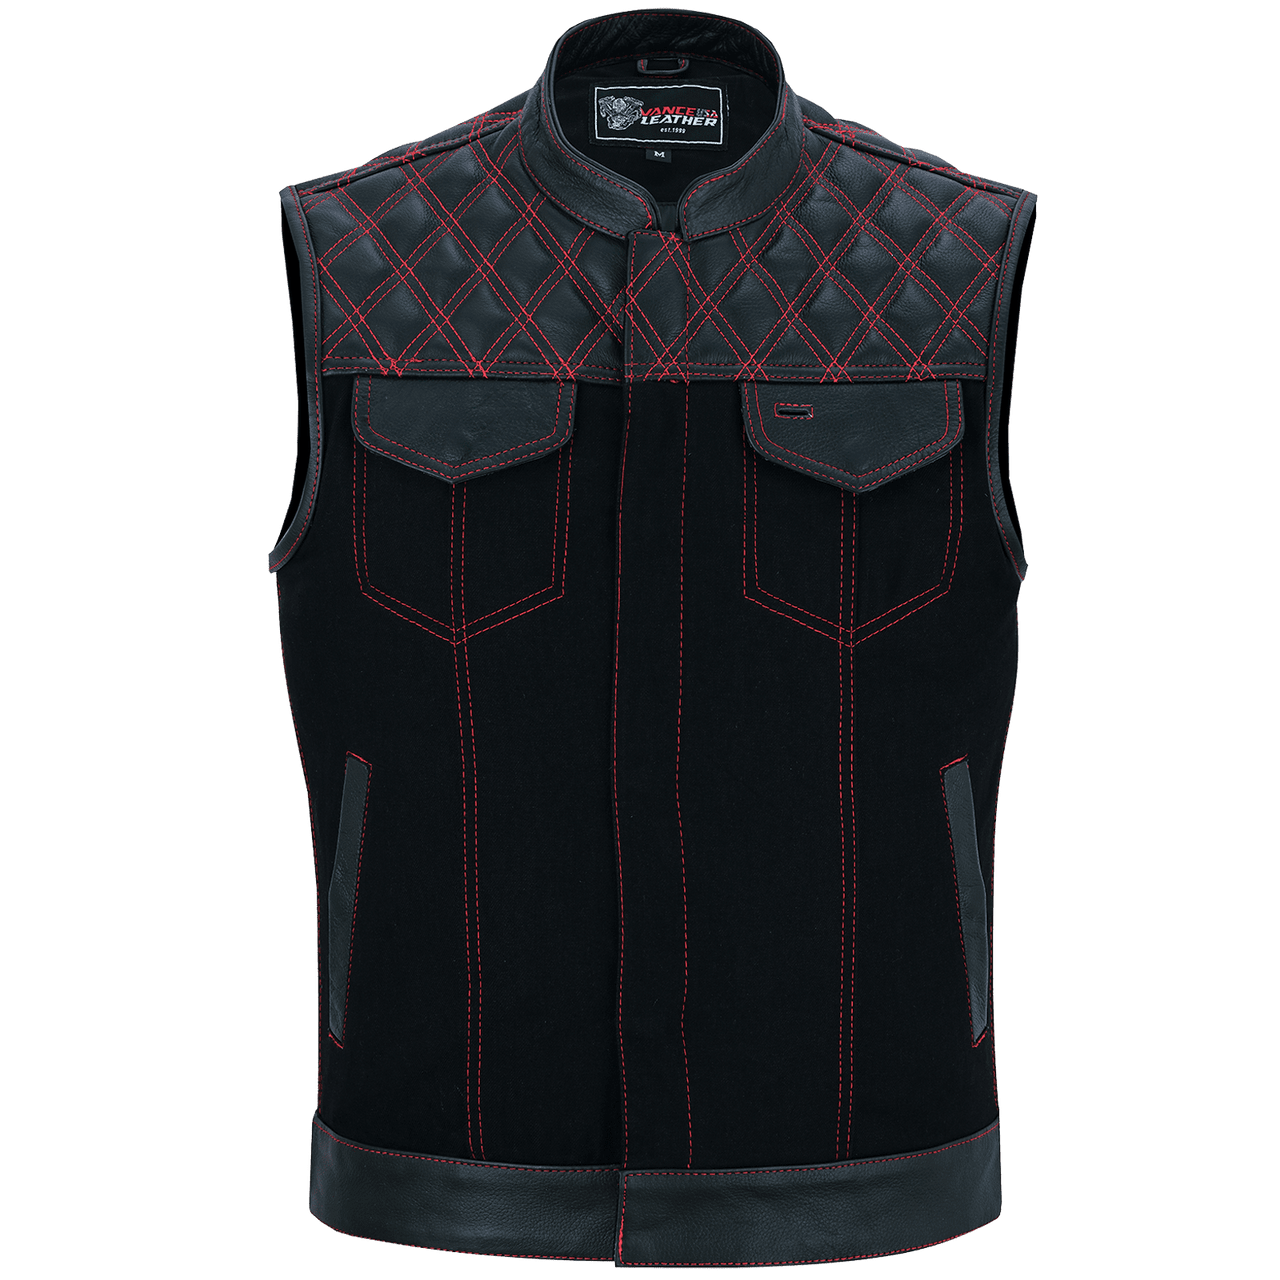 Vance-Leathers-VB924RD-Men's-Denim-Leather-Motorcycle-Vest-with-Red-Stitching-front-view